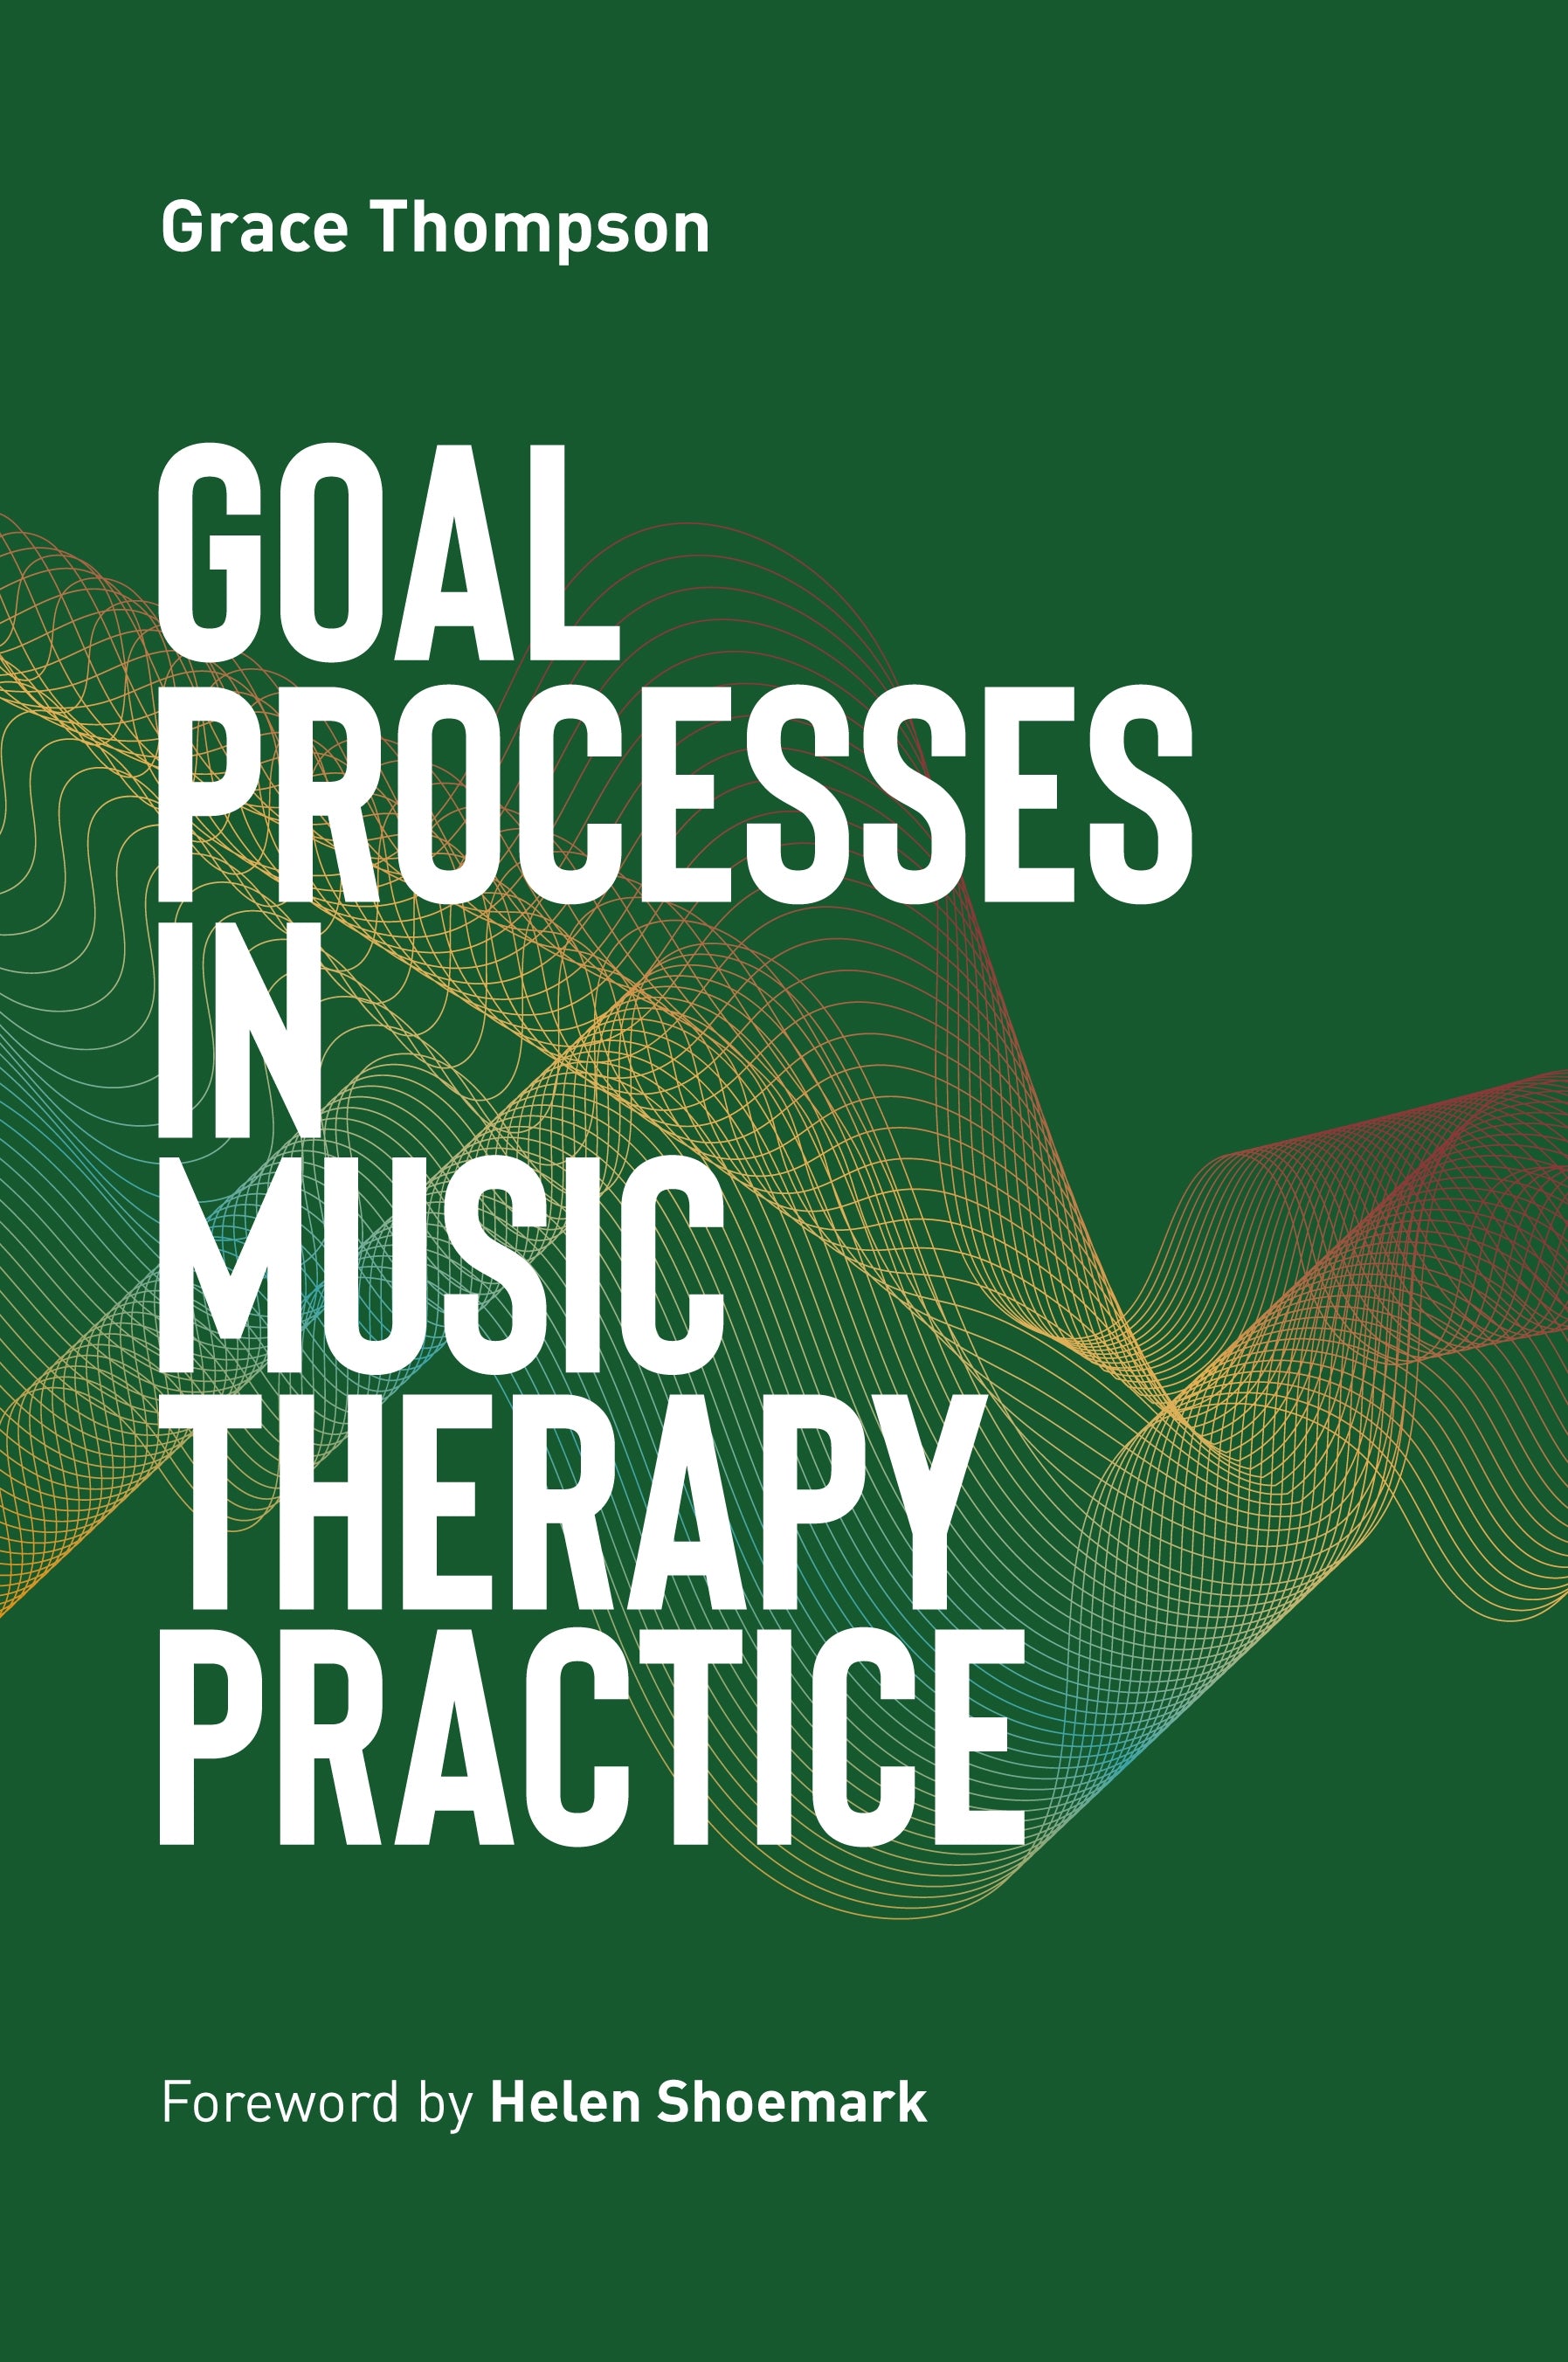 Goal Processes in Music Therapy Practice by Helen Shoemark, Grace Thompson